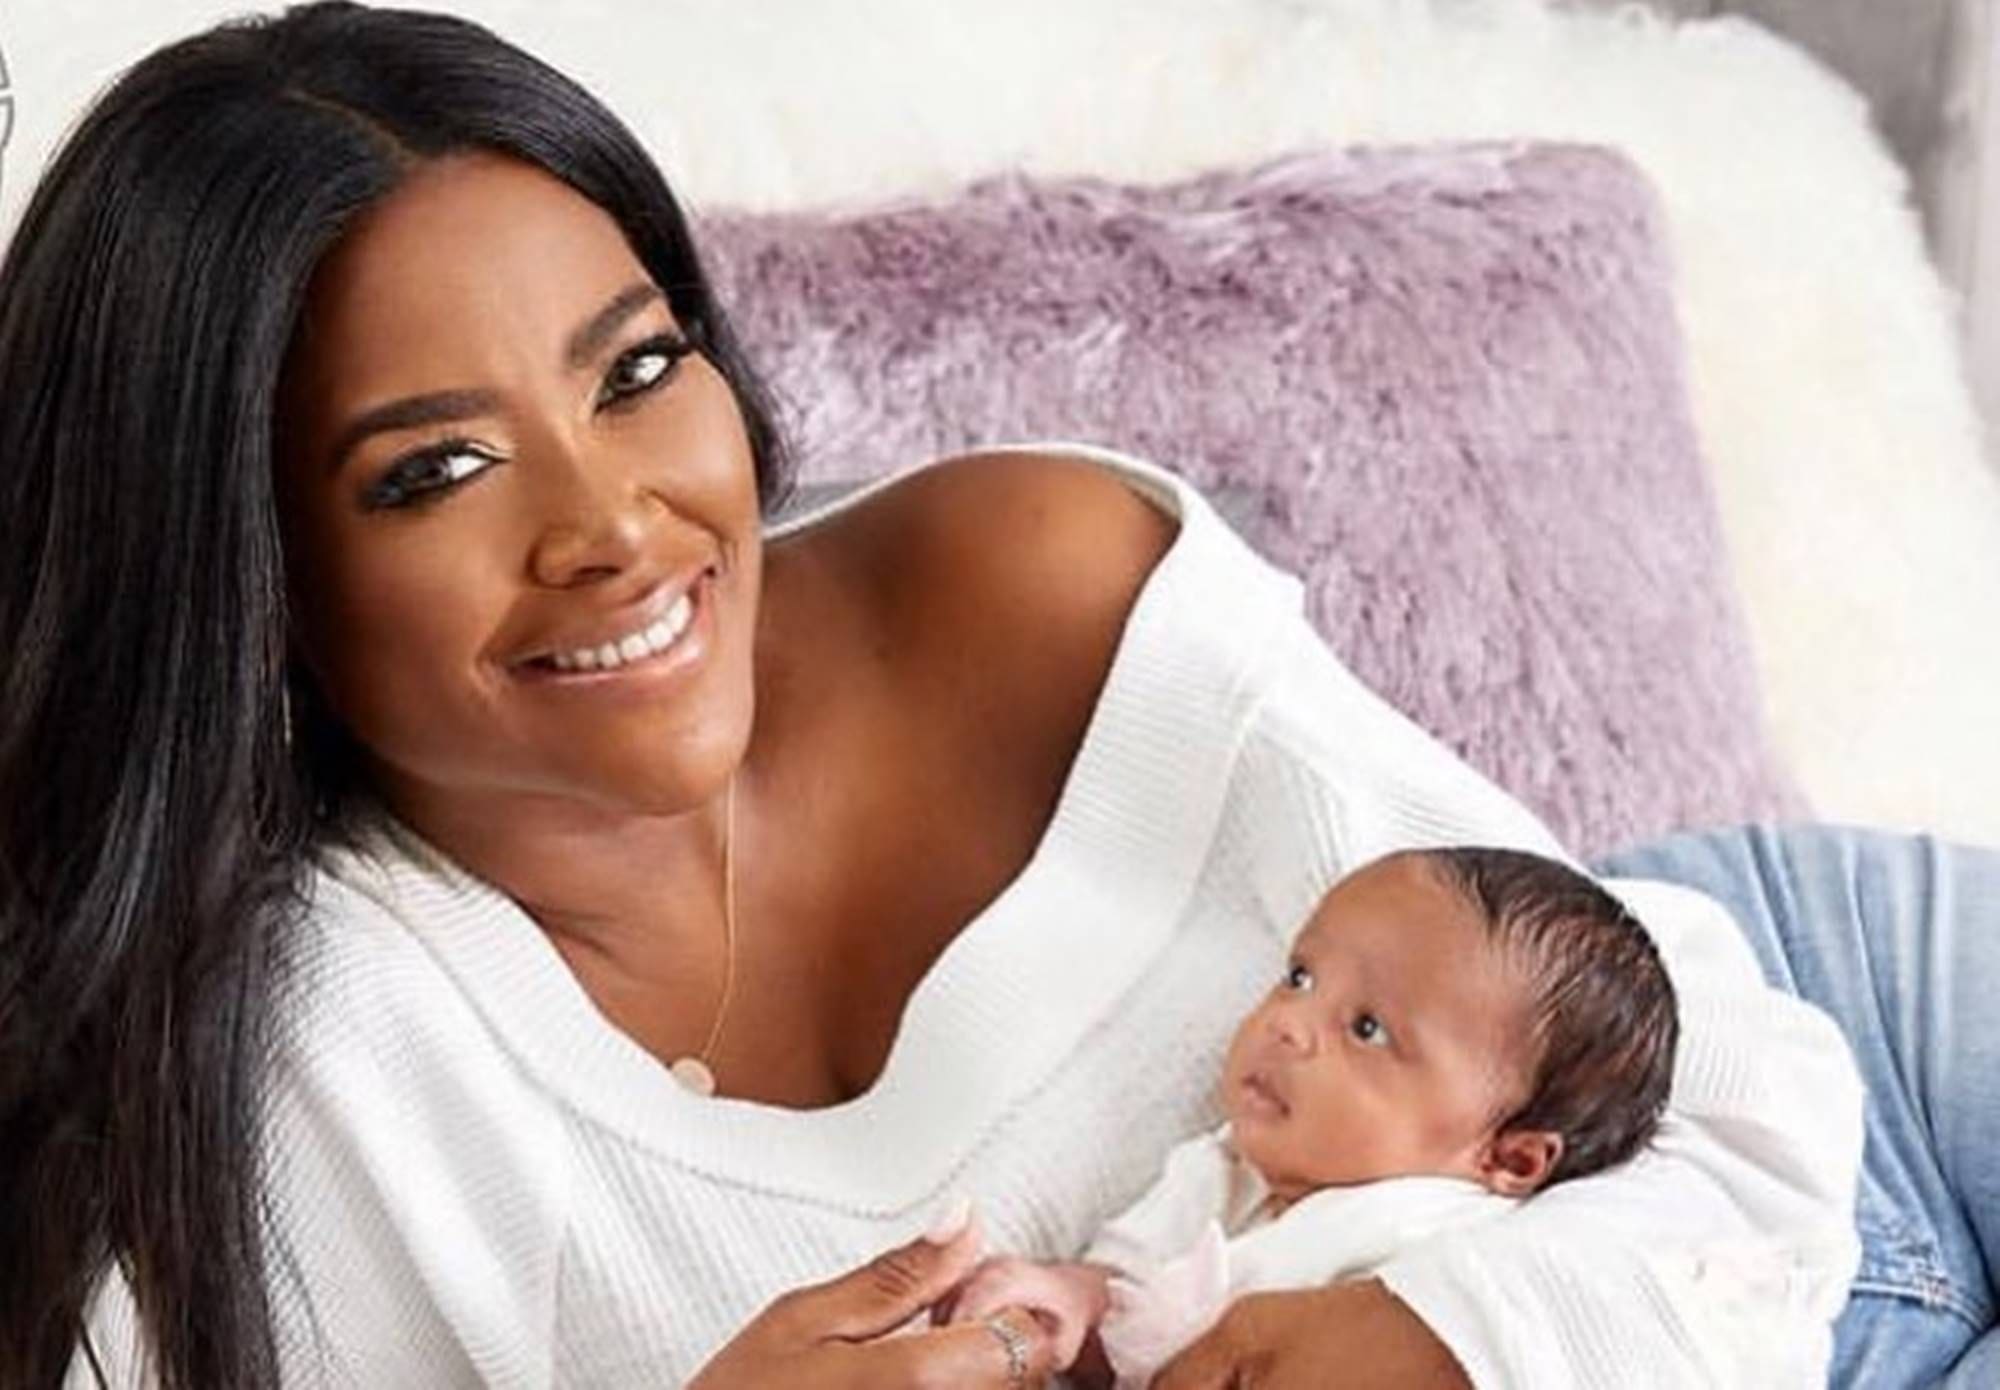 Kenya Moore Shows Off Her Hourglass Figure And Fans Are Blown Away By Her Tiny Waist